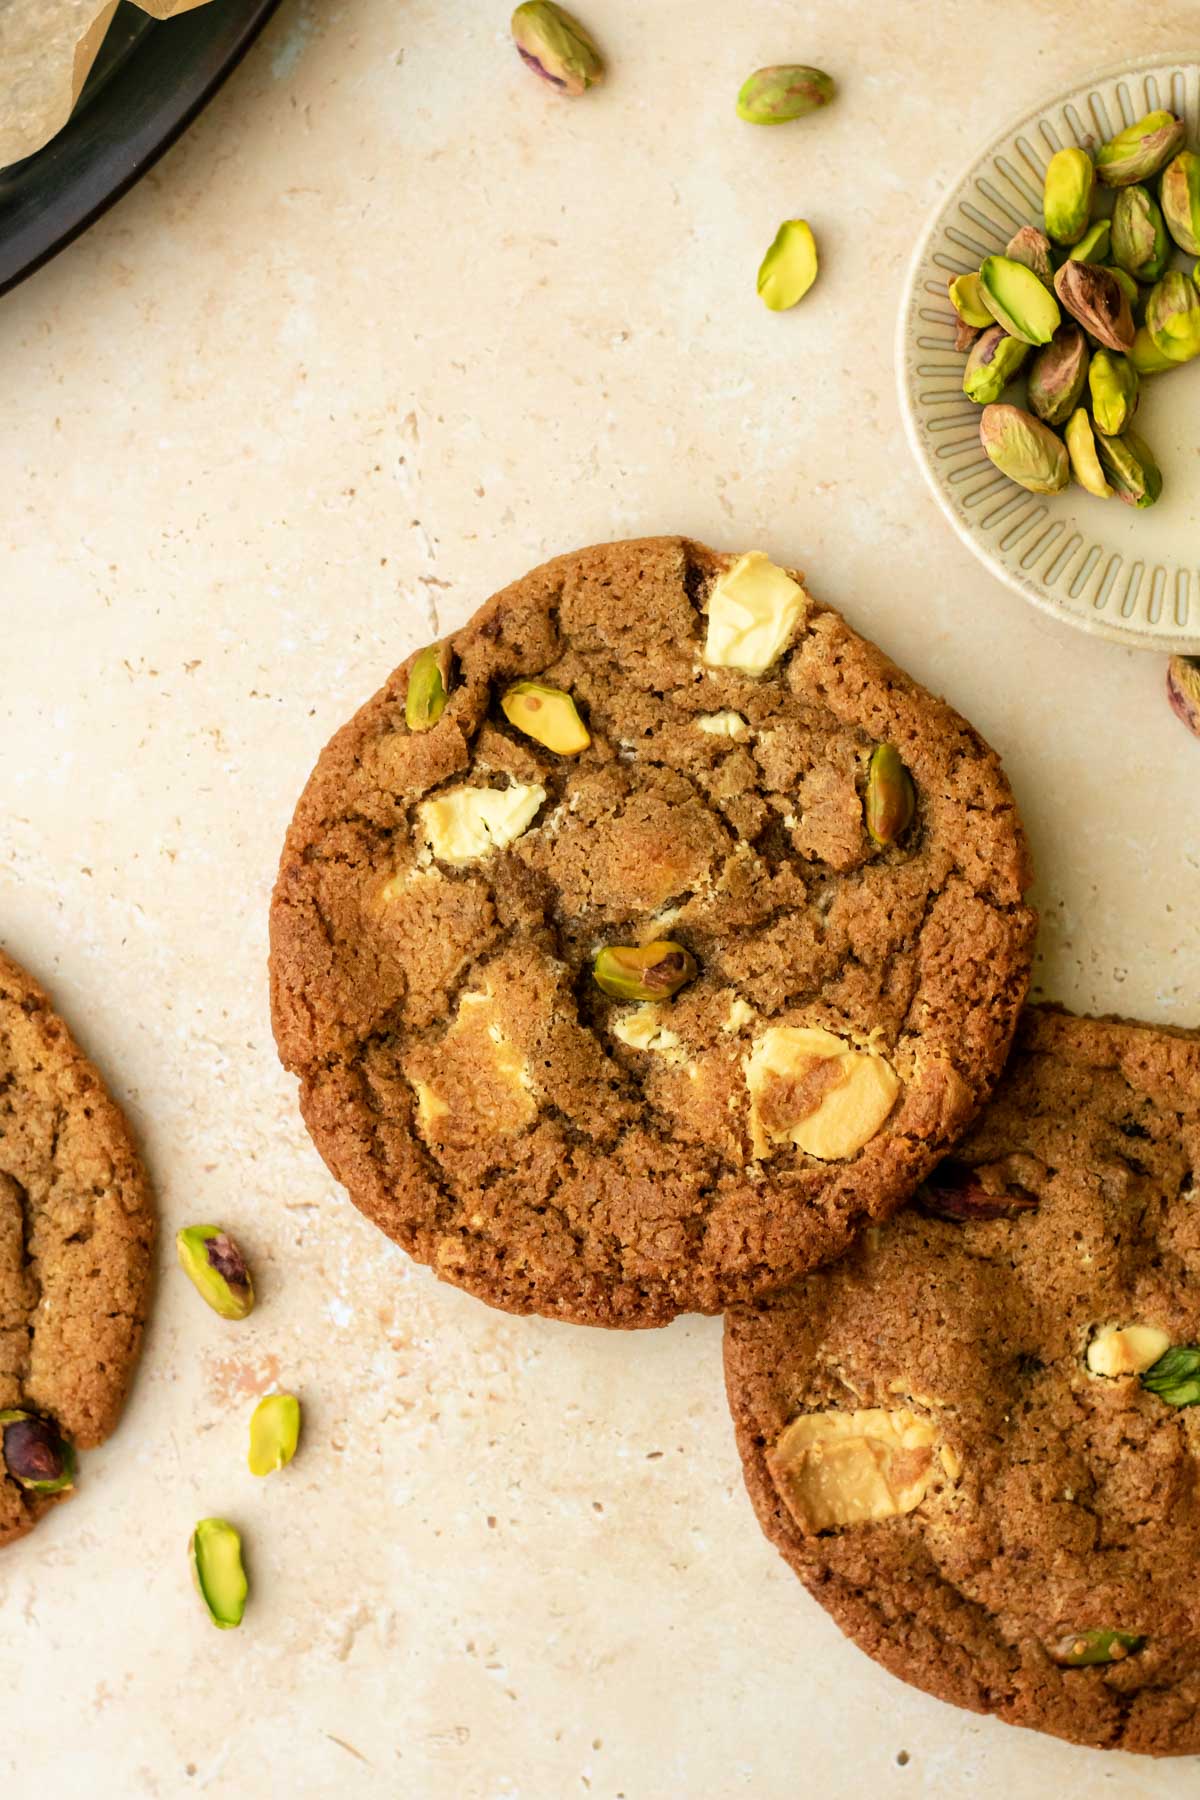 some cookies with white chocolate chunks and whole pistachios